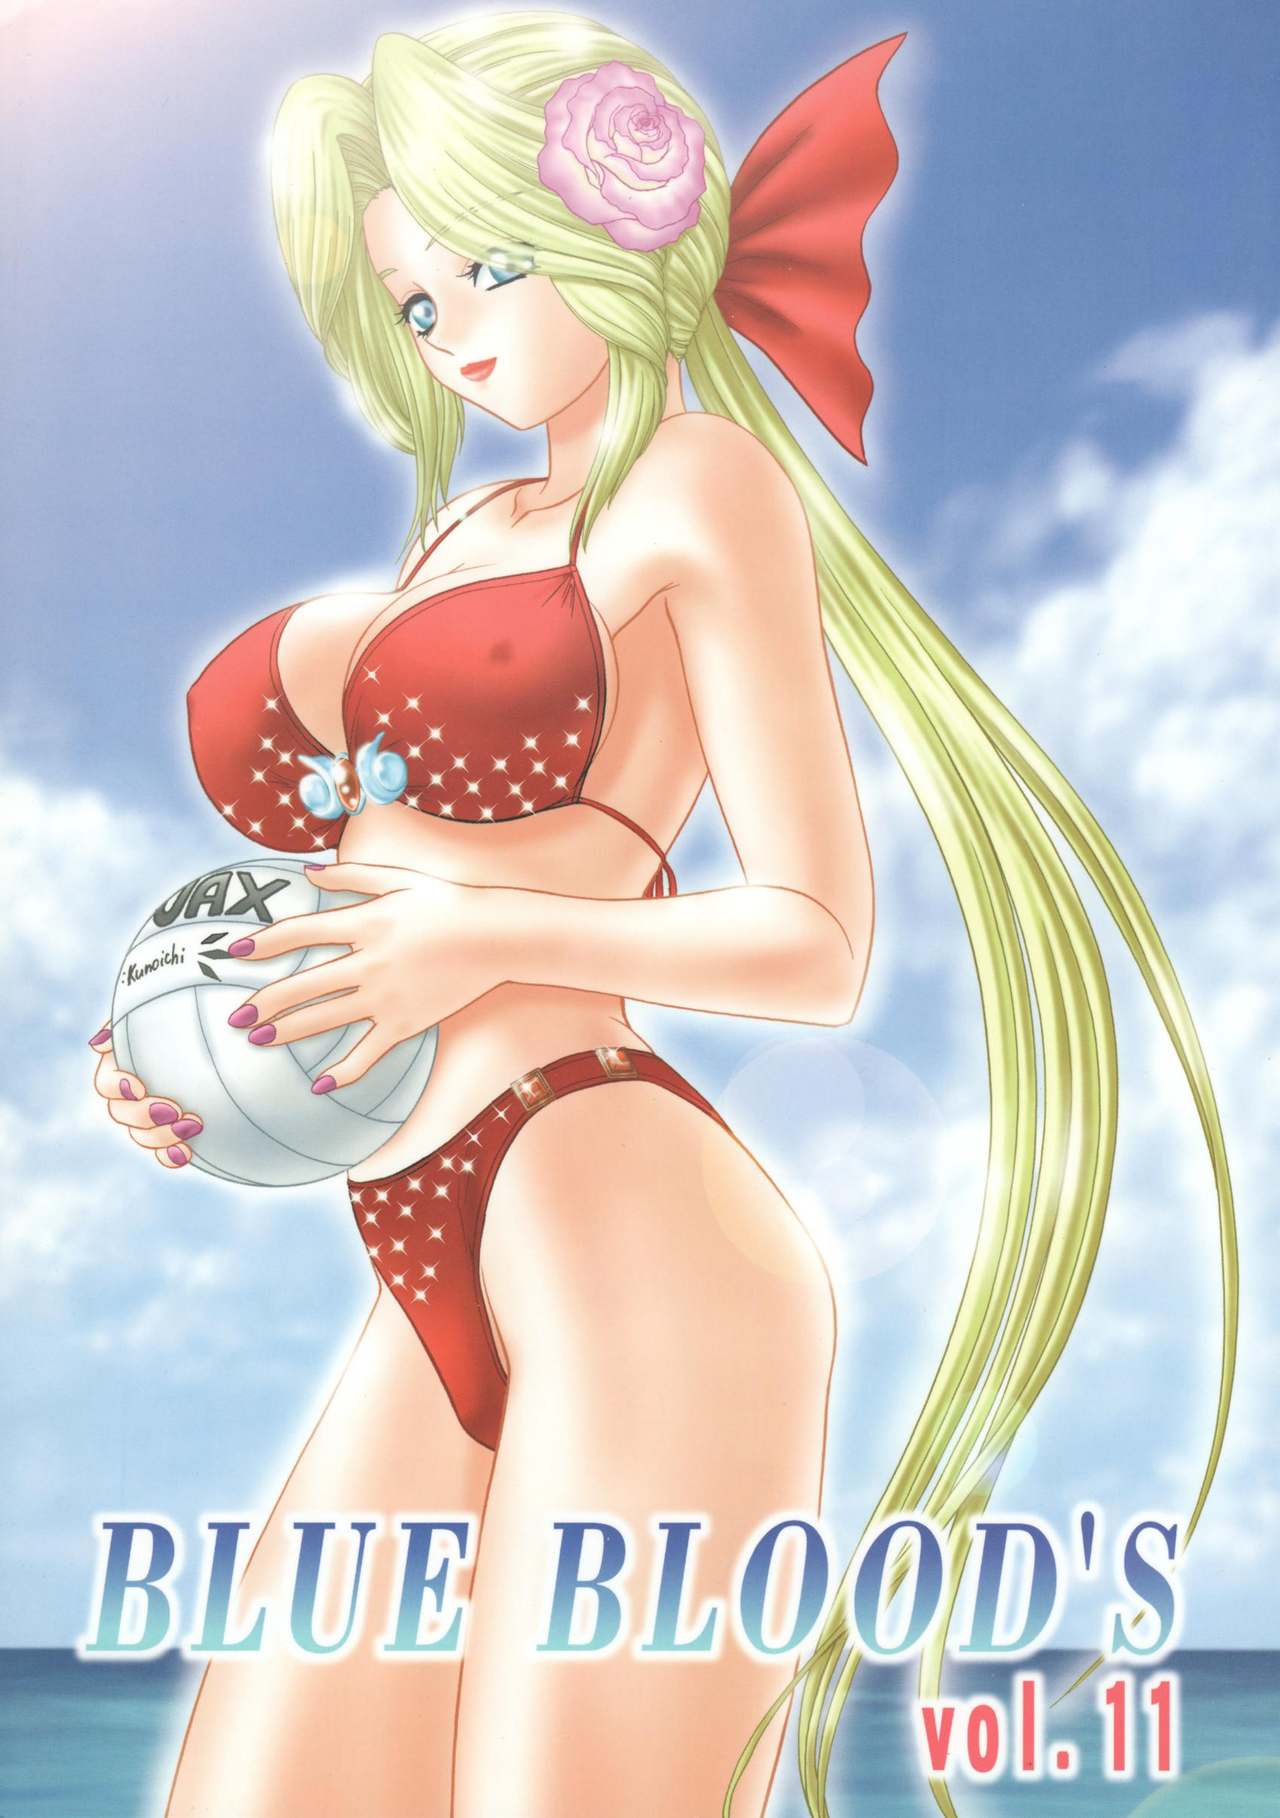 (CR33) [BLUE BLOOD'S (BLUE BLOOD)] BLUE BLOOD'S Vol. 11 (Dead or Alive Xtreme Beach Volleyball) (Cレヴォ33) [BLUE BLOOD'S (BLUE BLOOD)] BLUE BLOOD'S vol.11 (デッド・オア・アライブ エクストリーム・ビーチバレーボール)